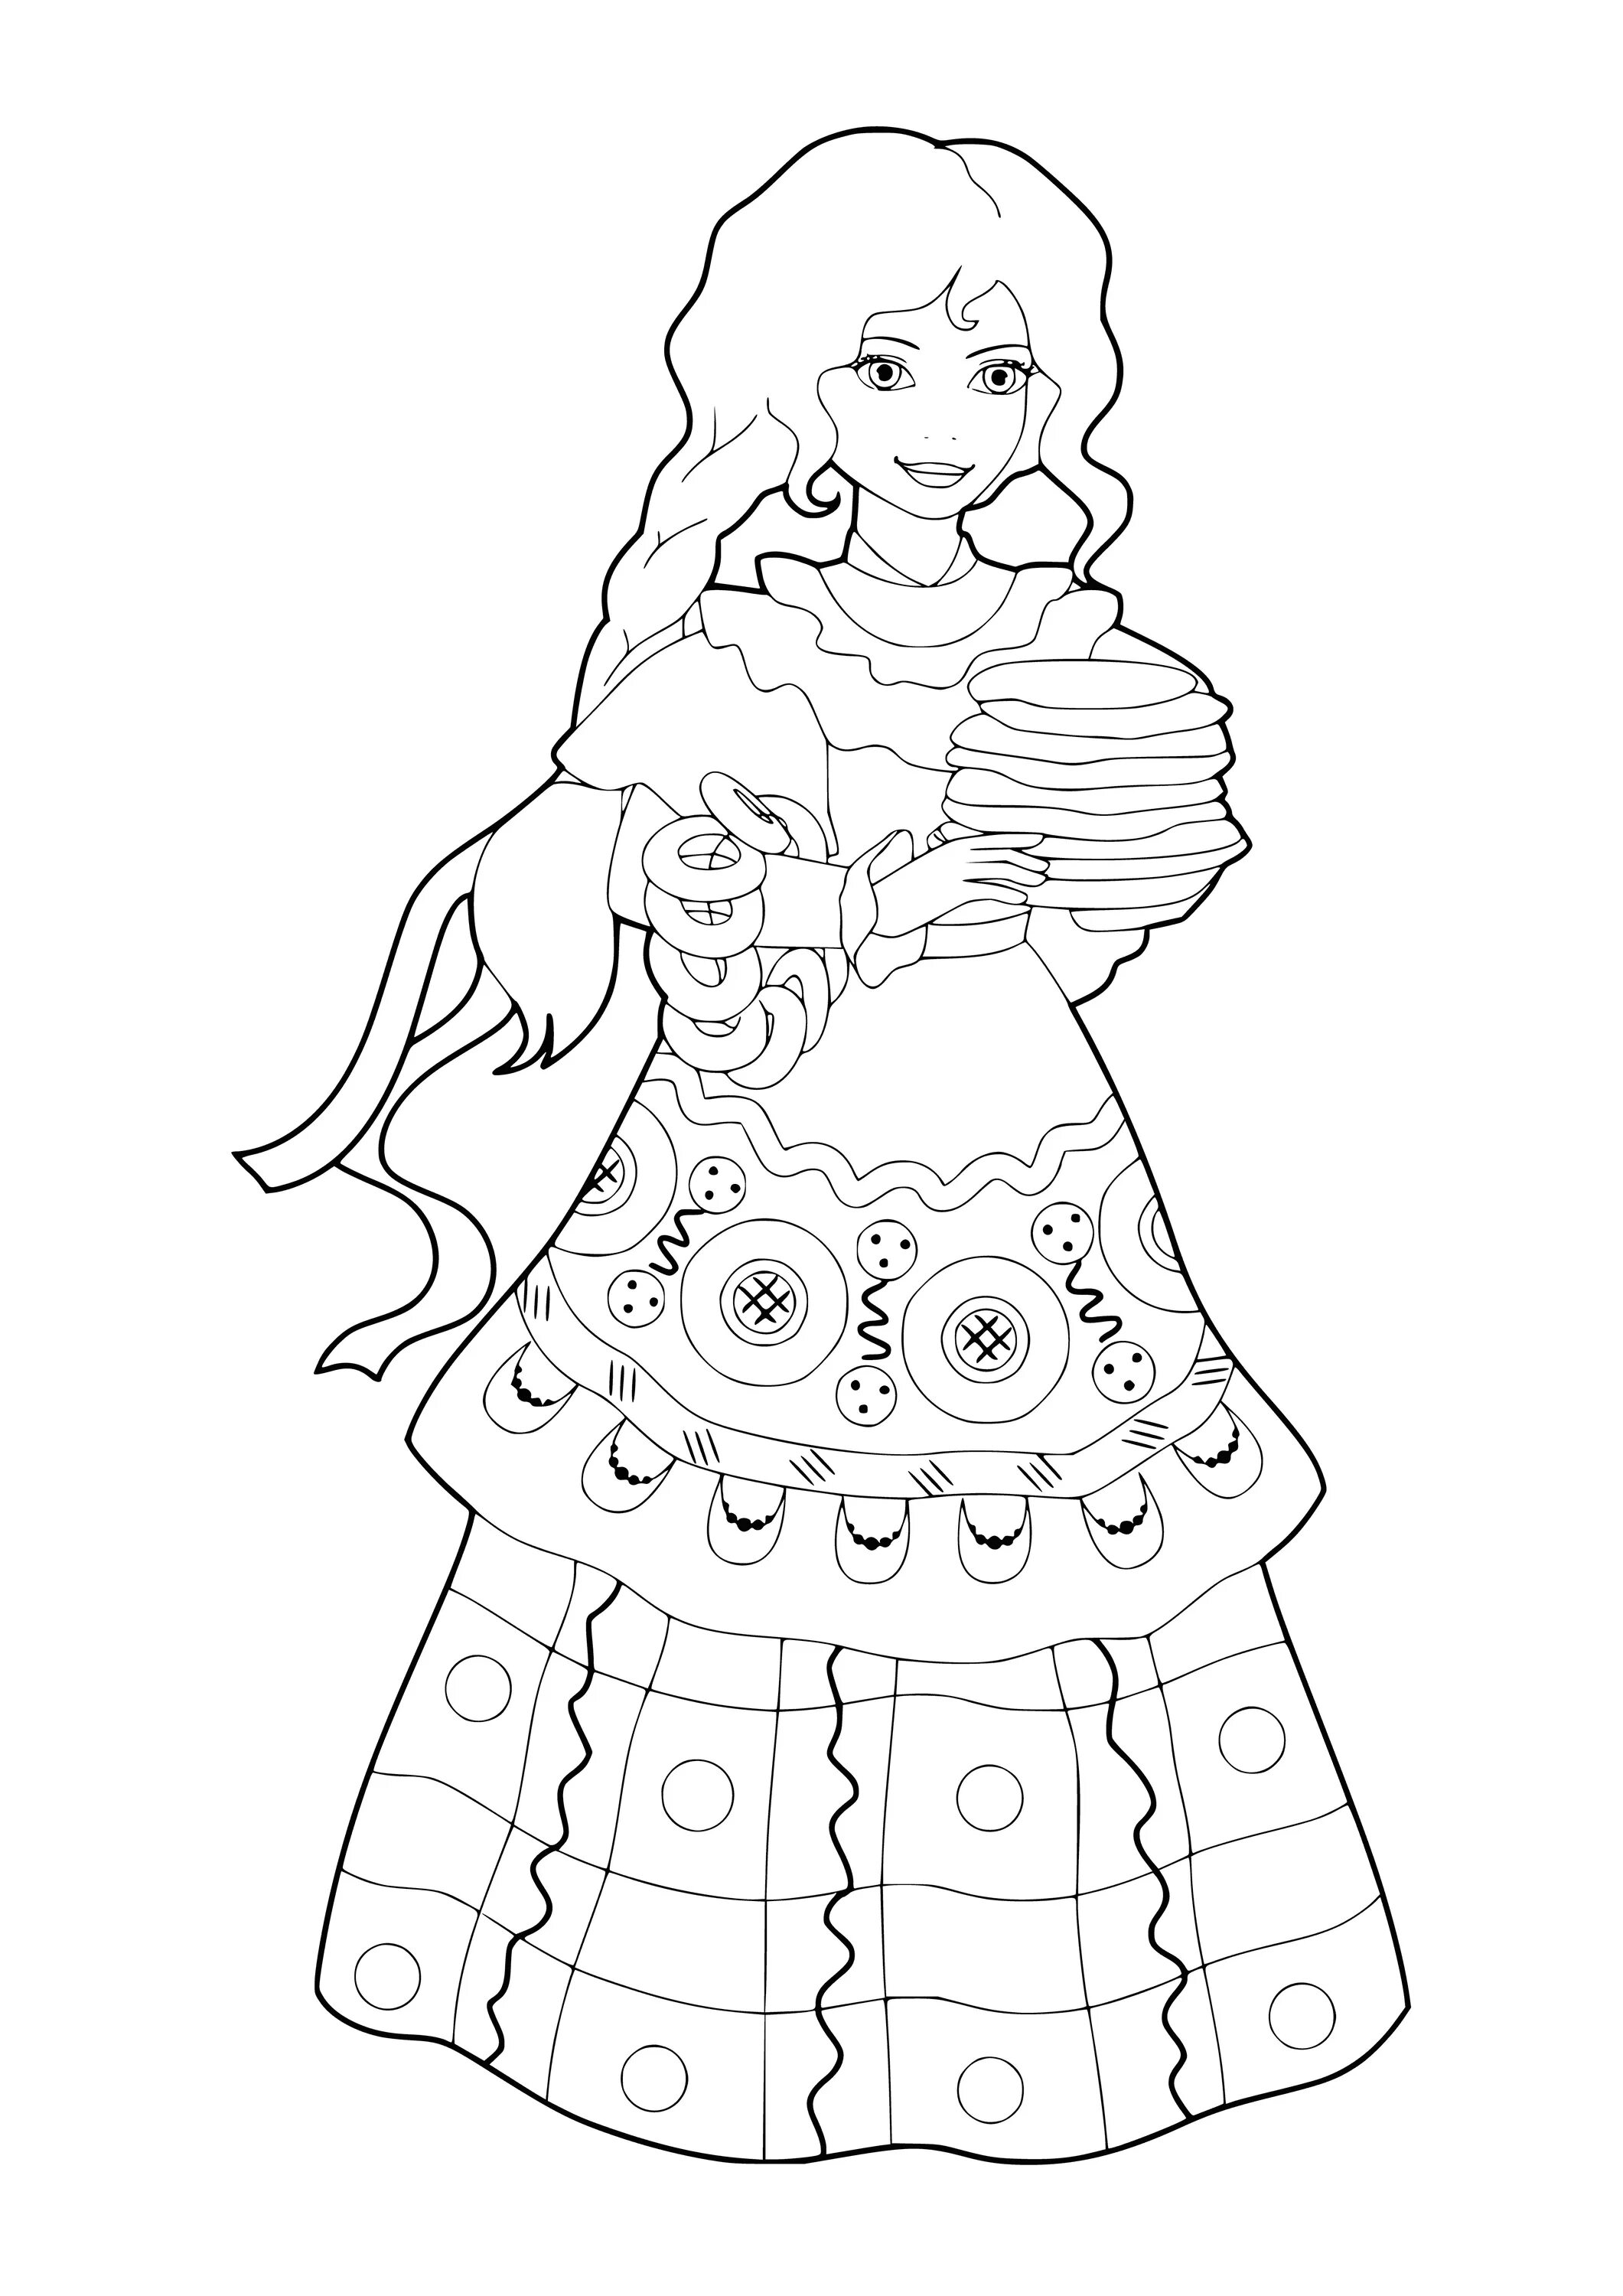 Coloring page surreal Russian beauty